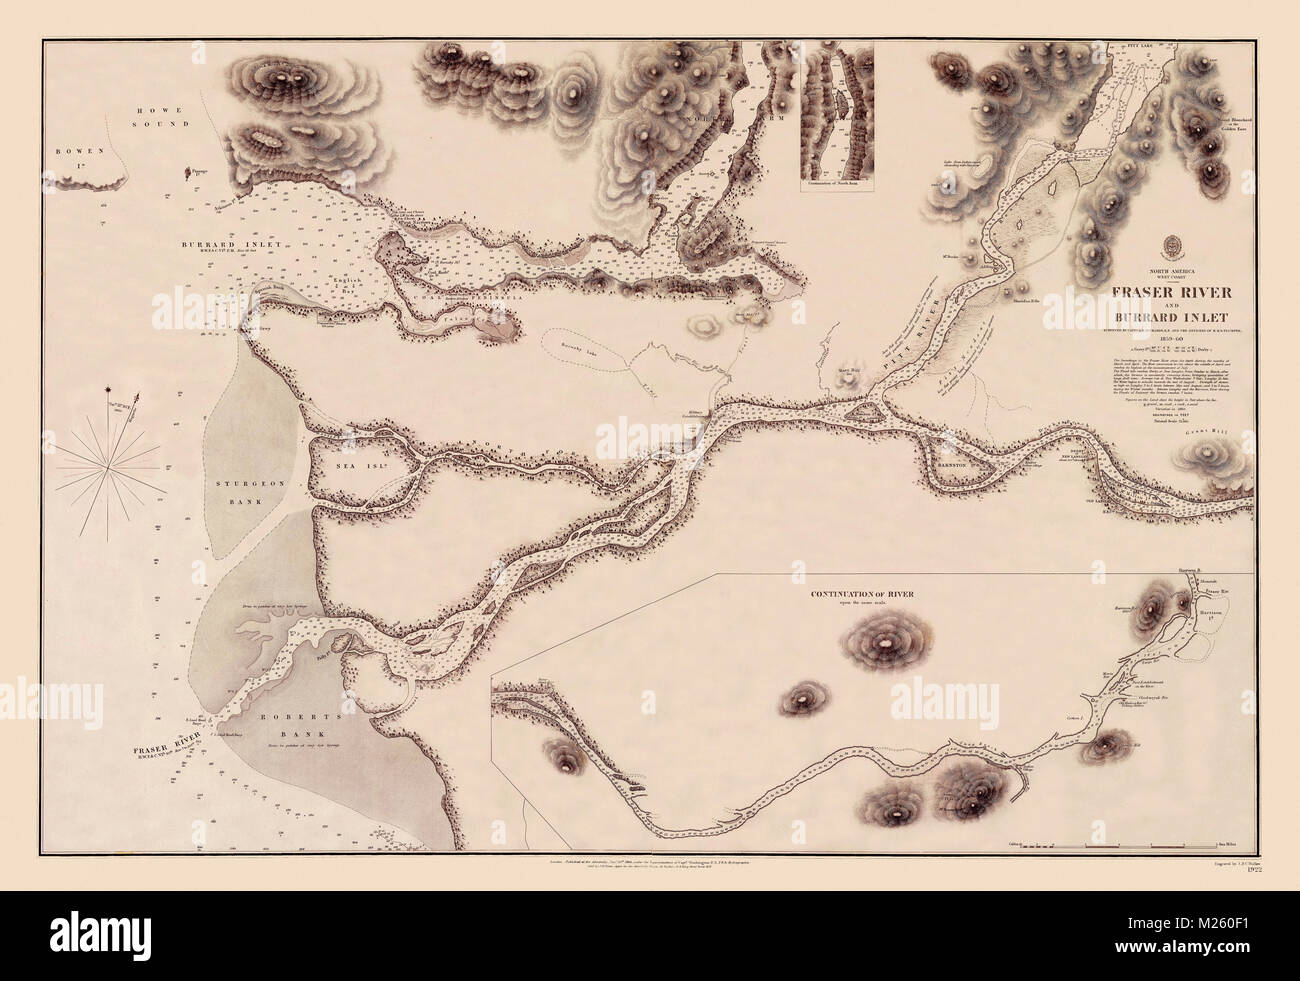 Historical map of the Fraser River in British Columbia circa 1860. Stock Photo